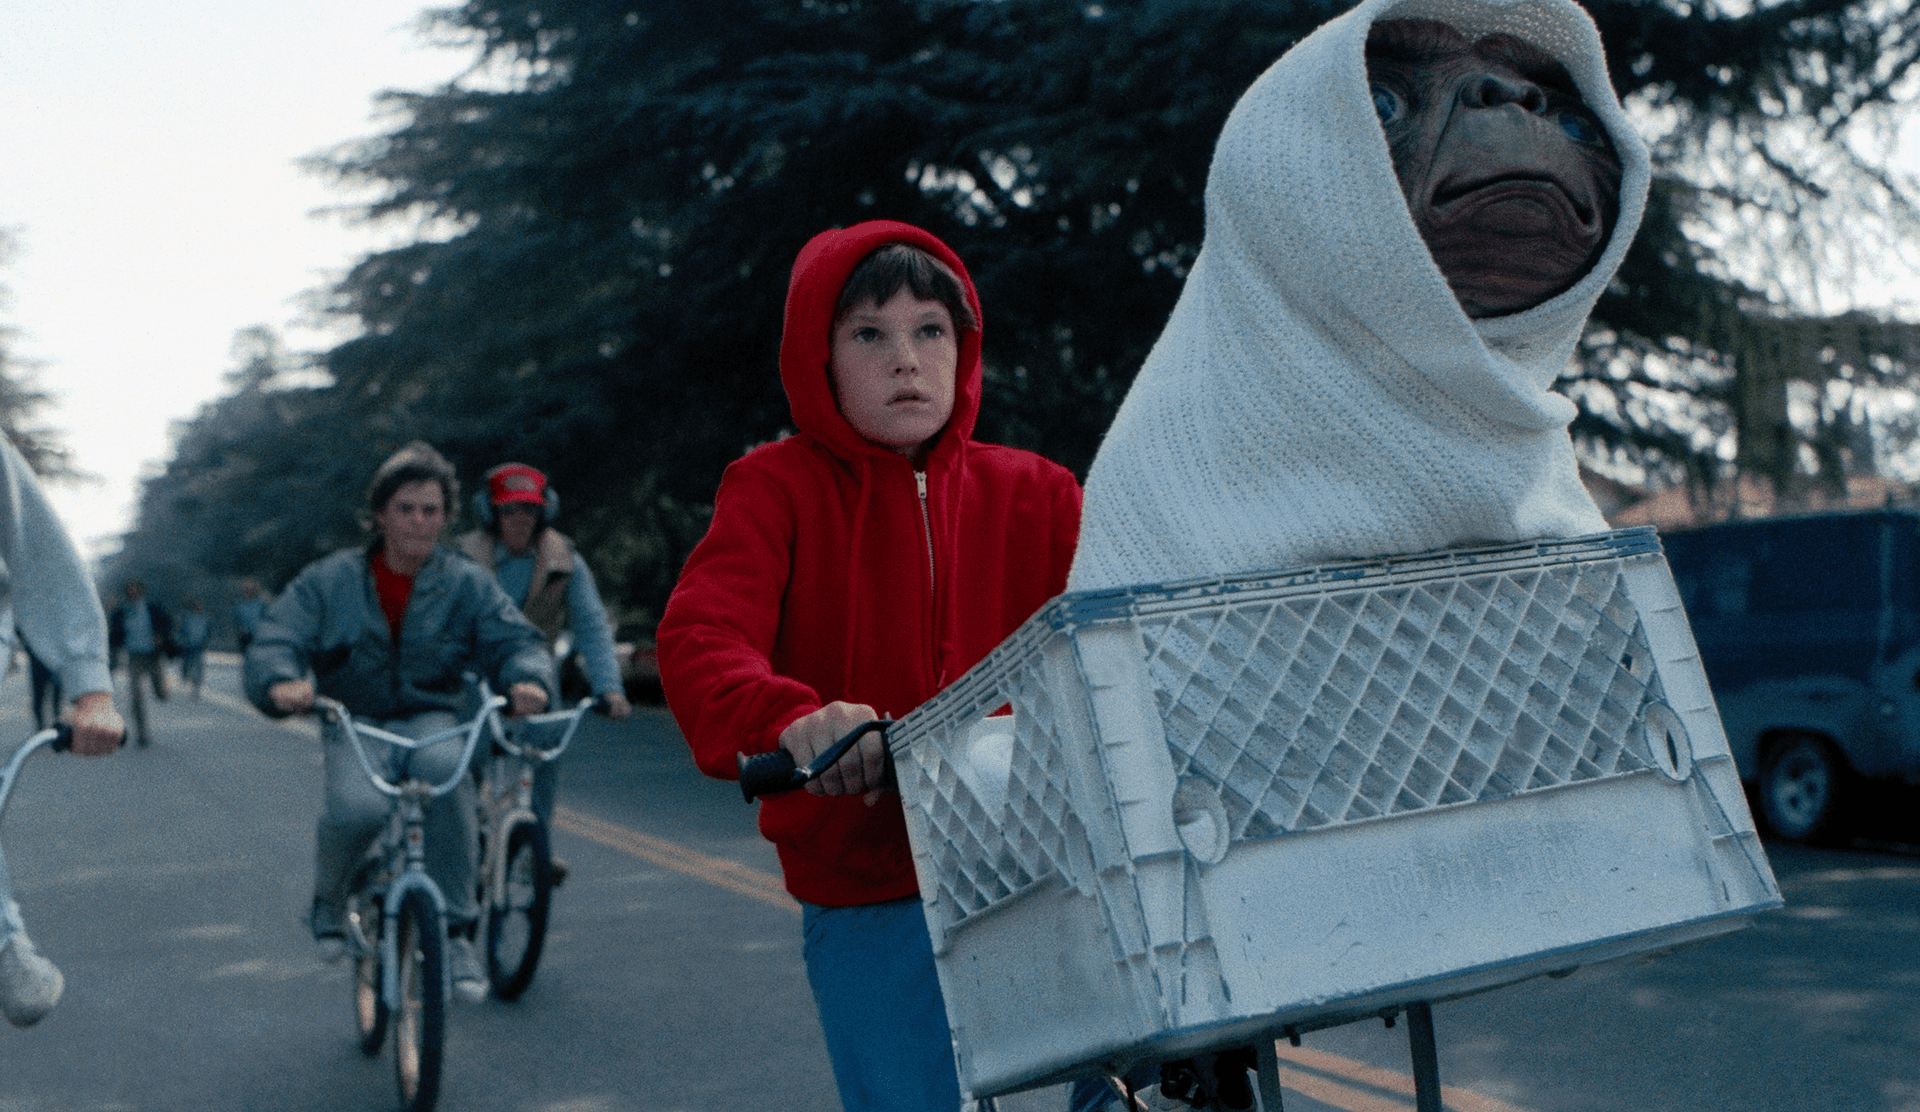 E. T. The Extraterrestrial